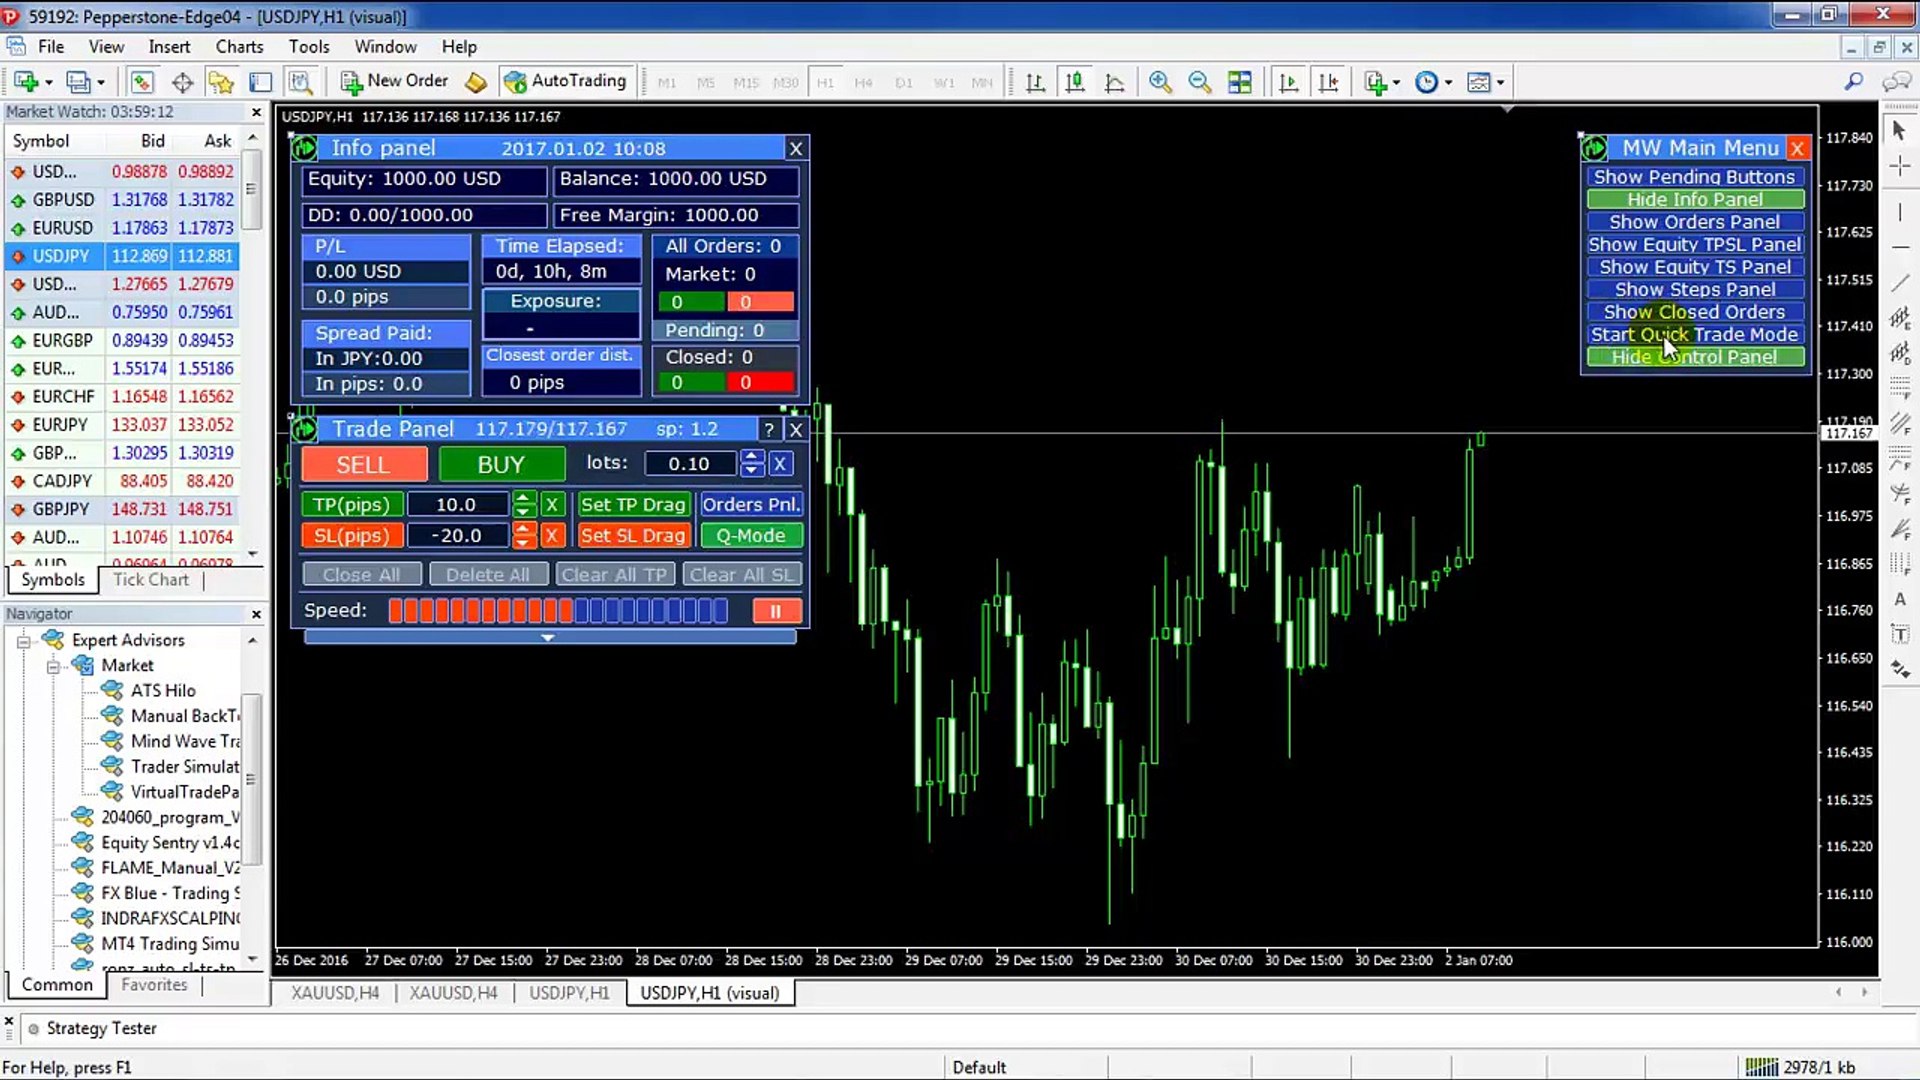 Mt4 forex simulator trading forex profit calculator with leverage episode